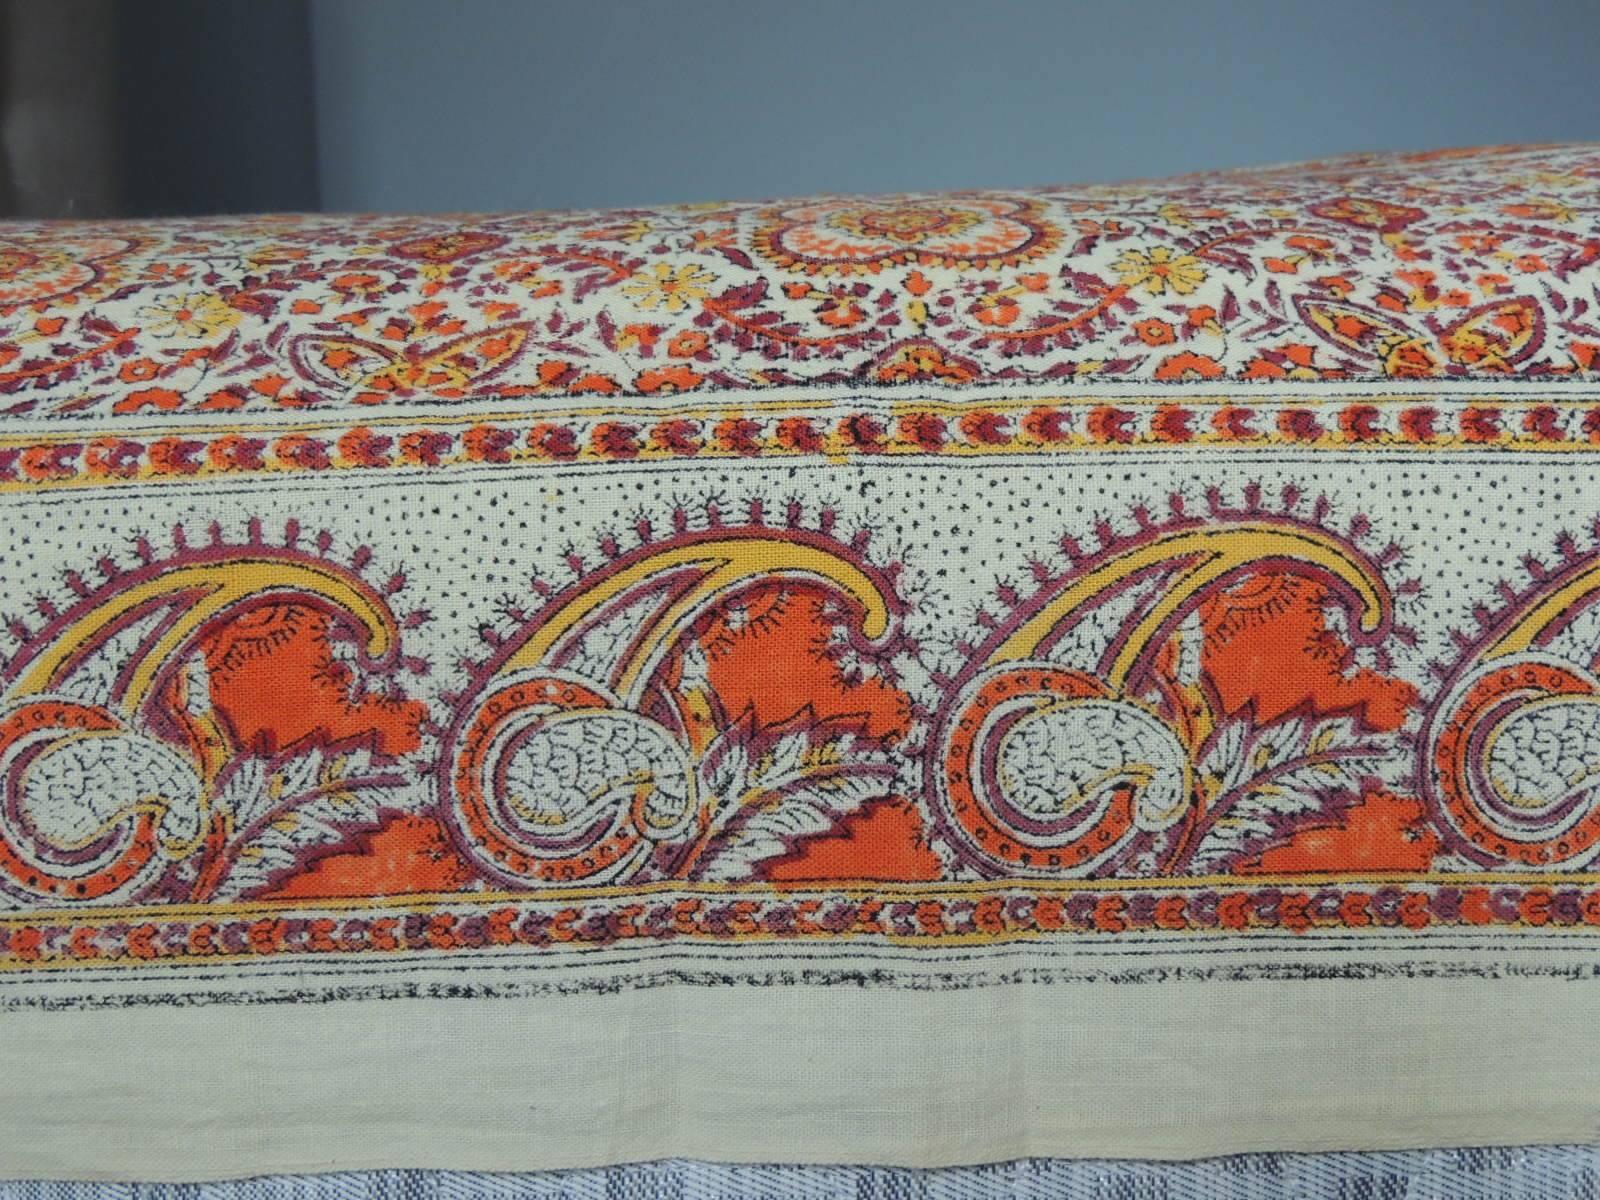 Cotton Vintage Orange and Yellow Hand-Blocked Indian Cloth